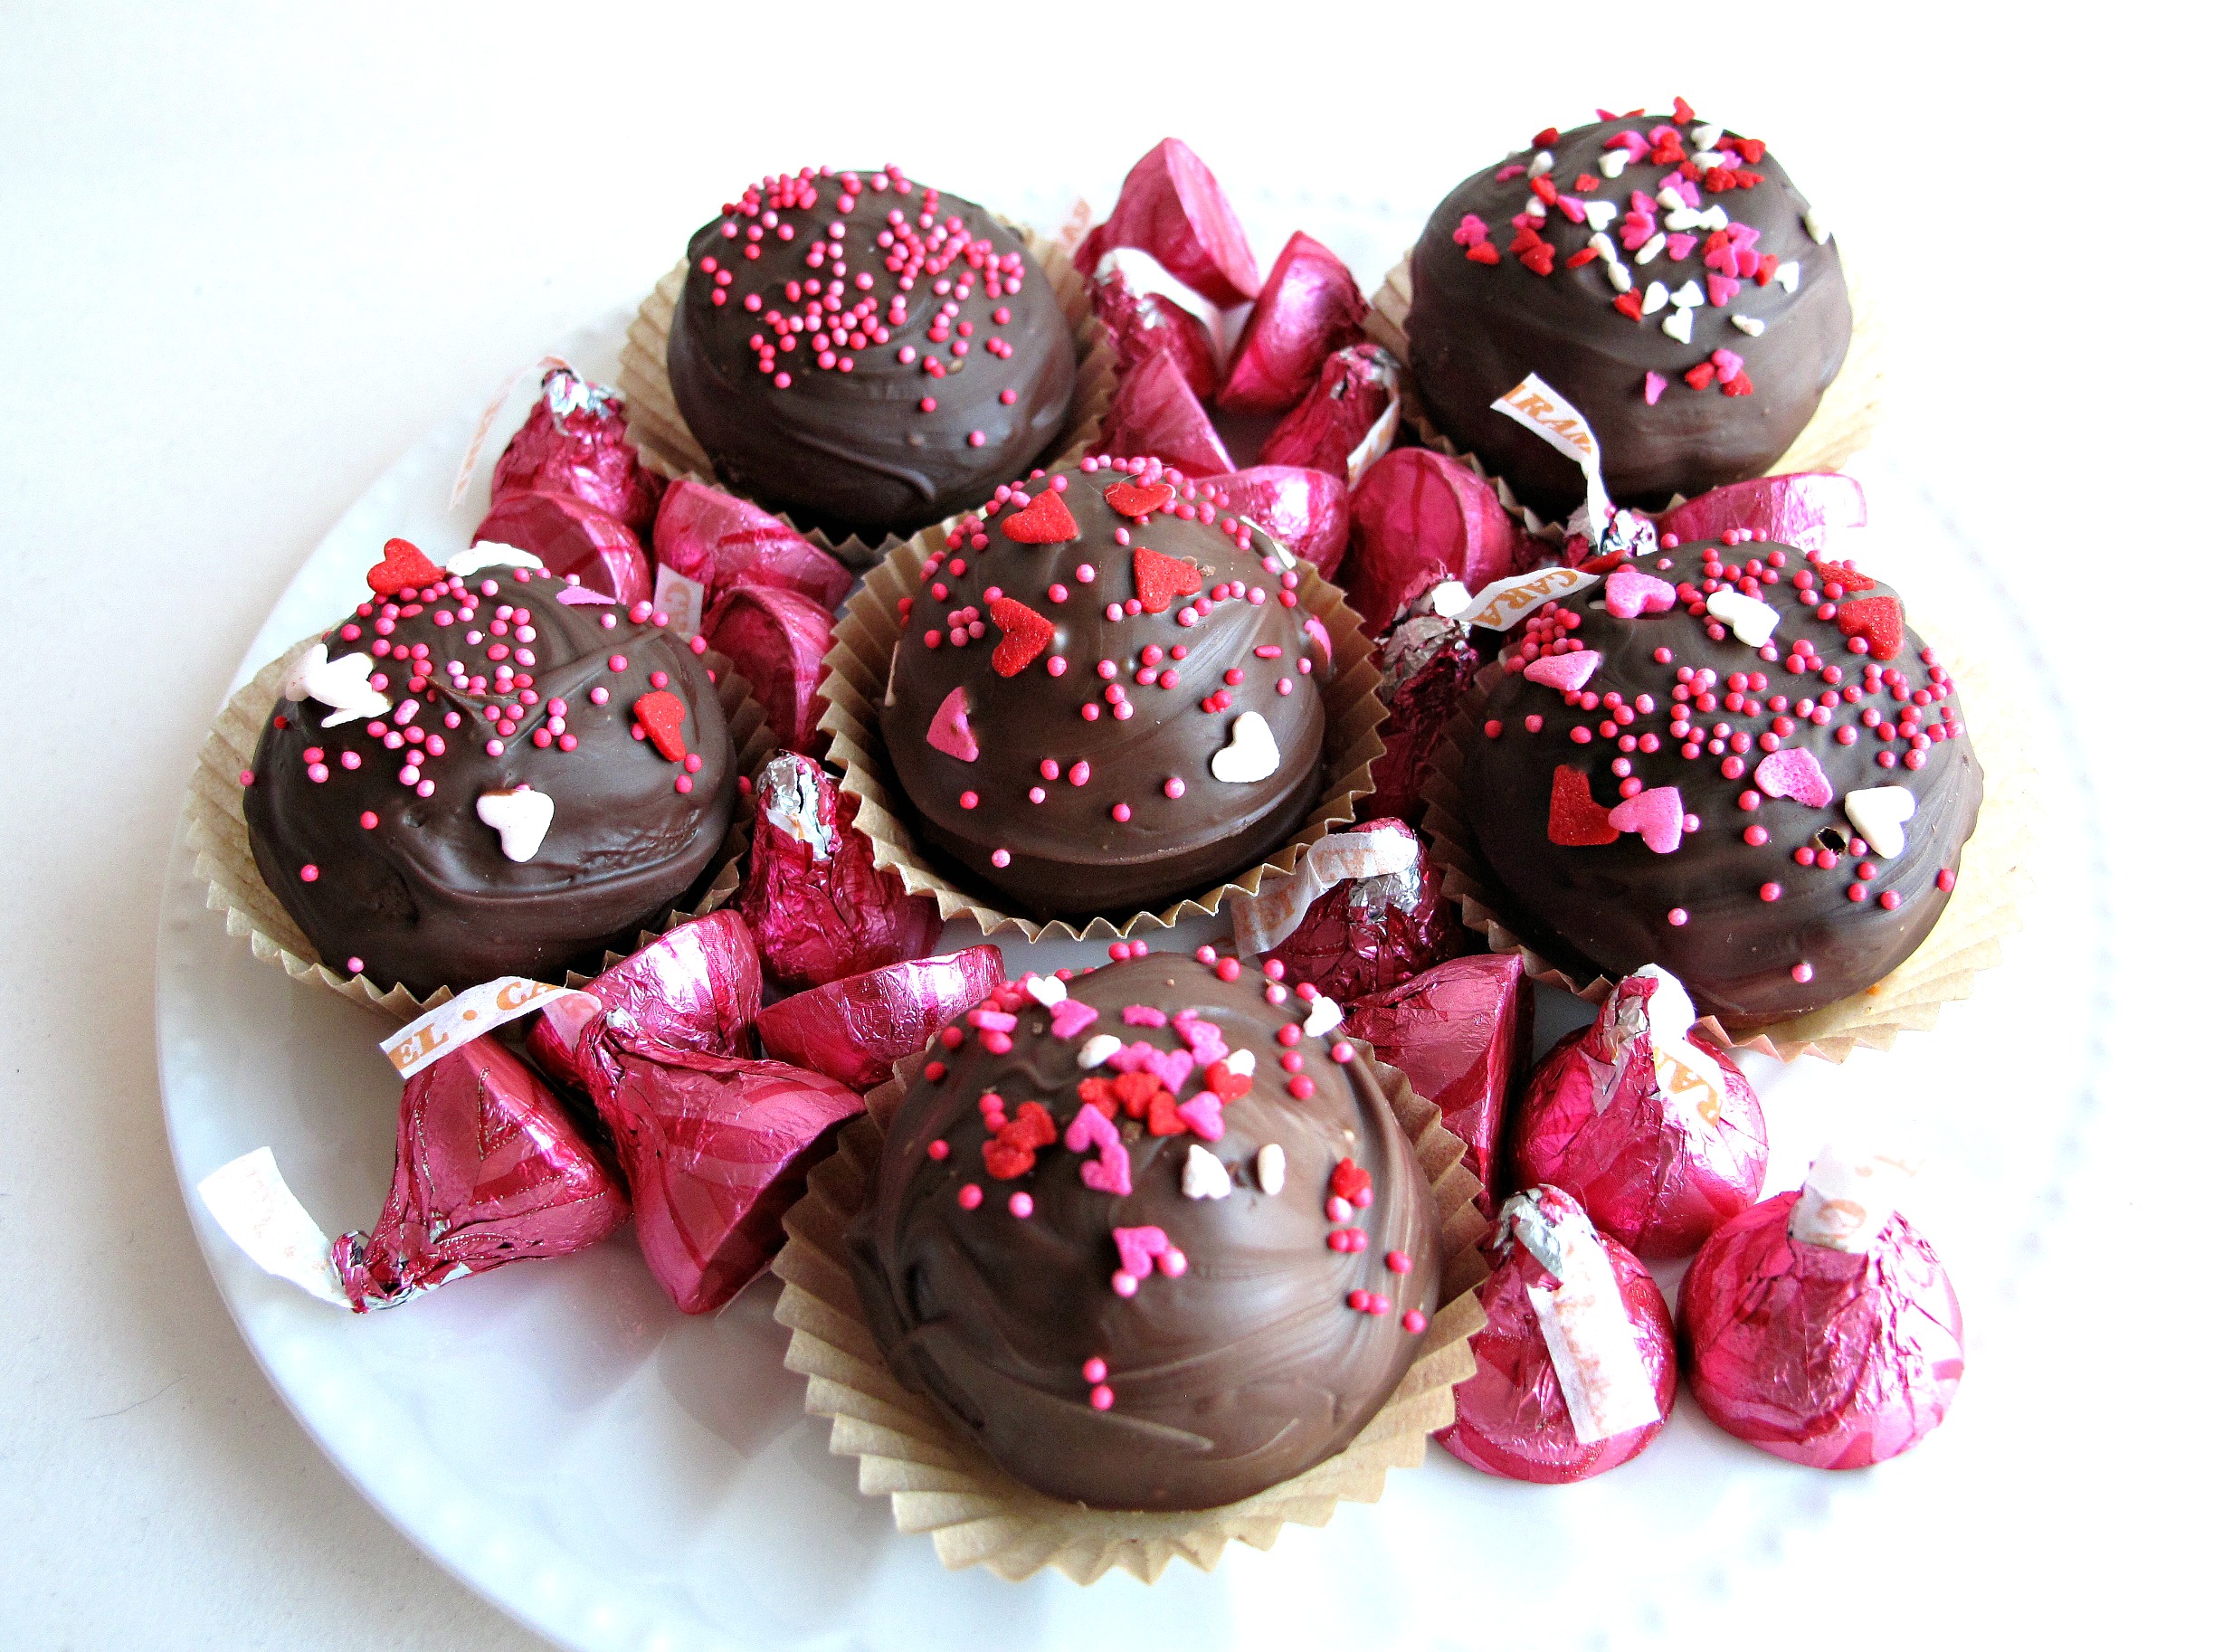 Kiss Cookies, ball-like chocolate cookies dipped in chocolate and sprinkled with Valentine sprinkles, on a plate with pink foil Hershey's kisses